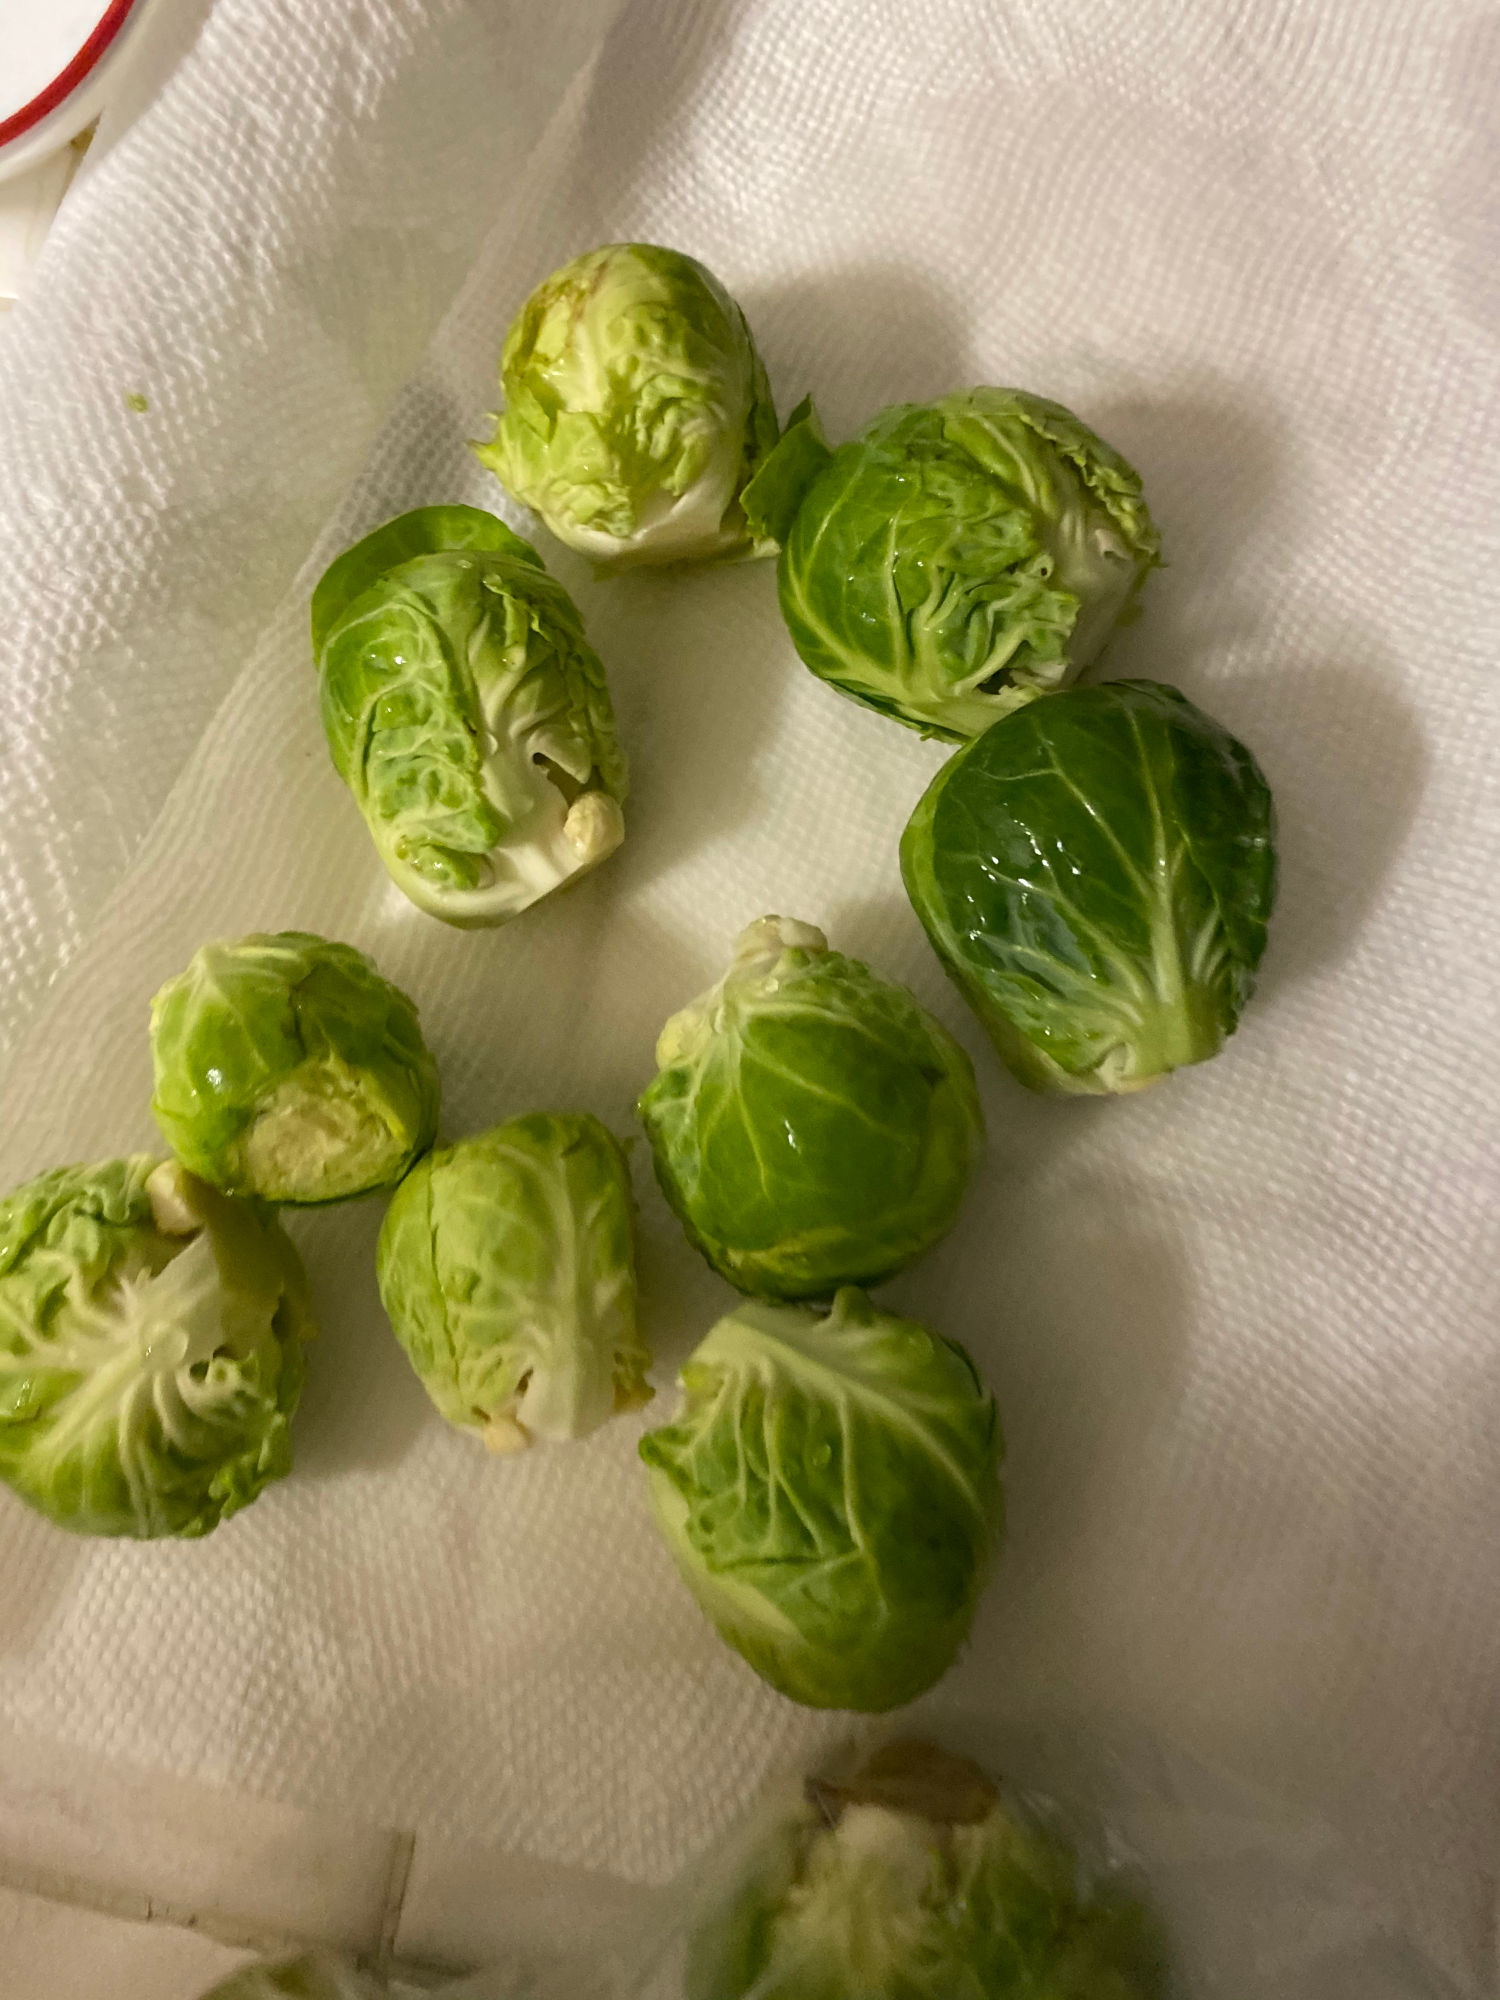 Roasted Brussels Sprouts Clean and Trim